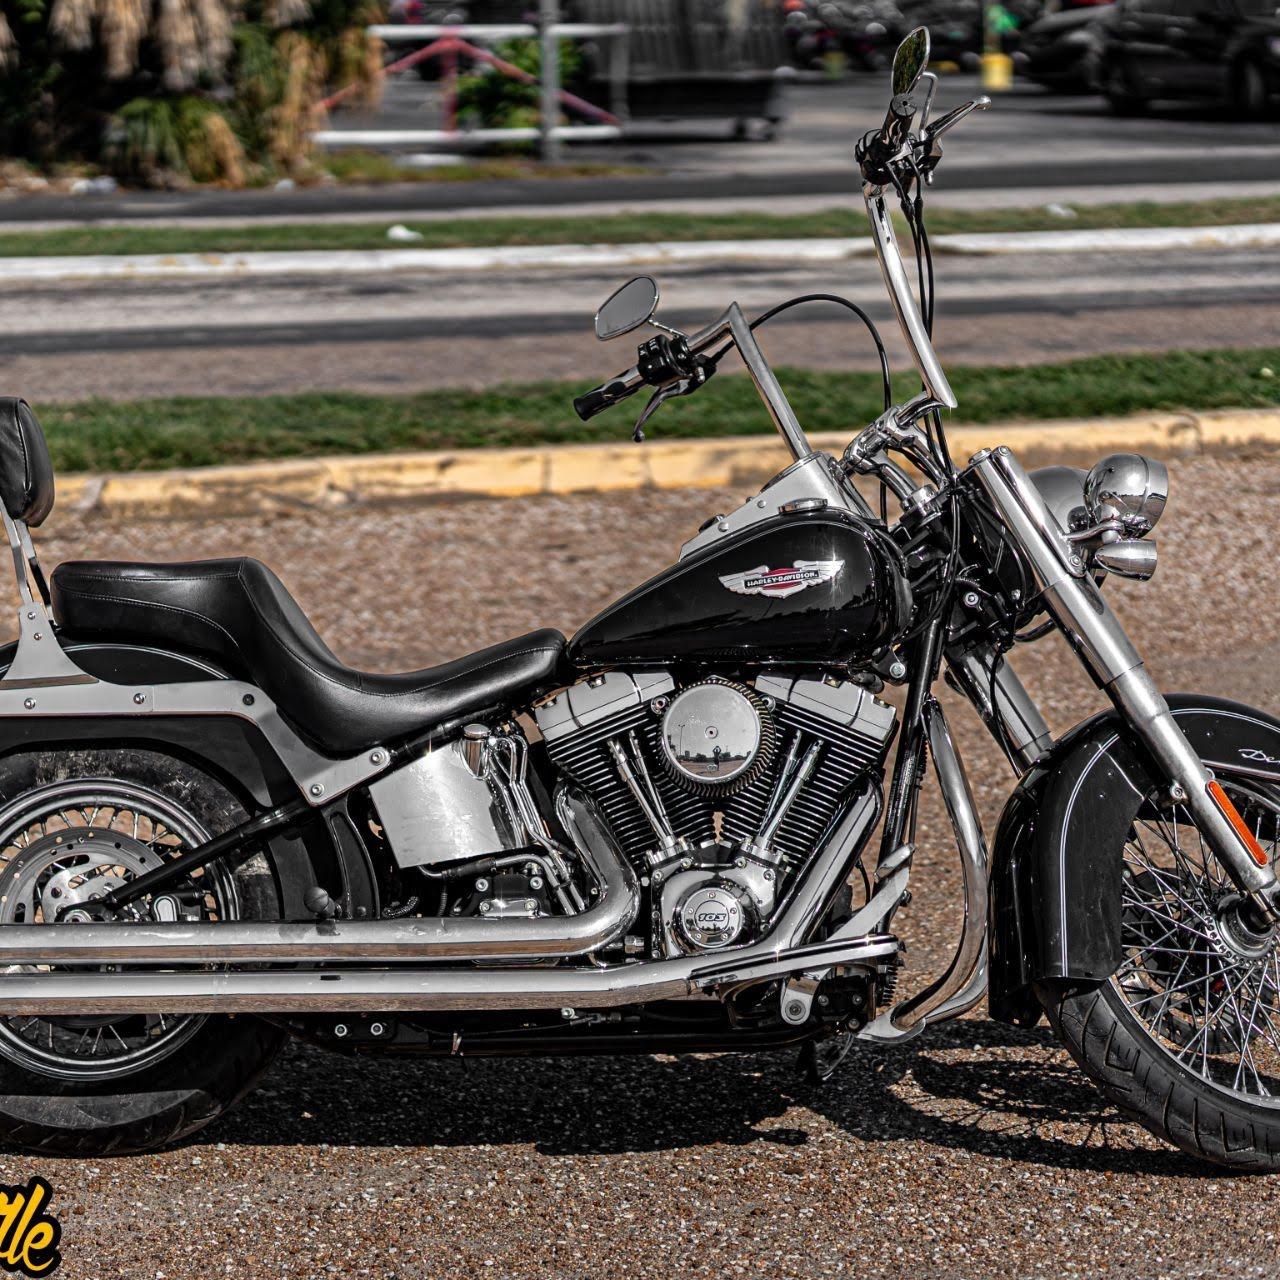 2012 Harley Davidson Soft tail Deluxe